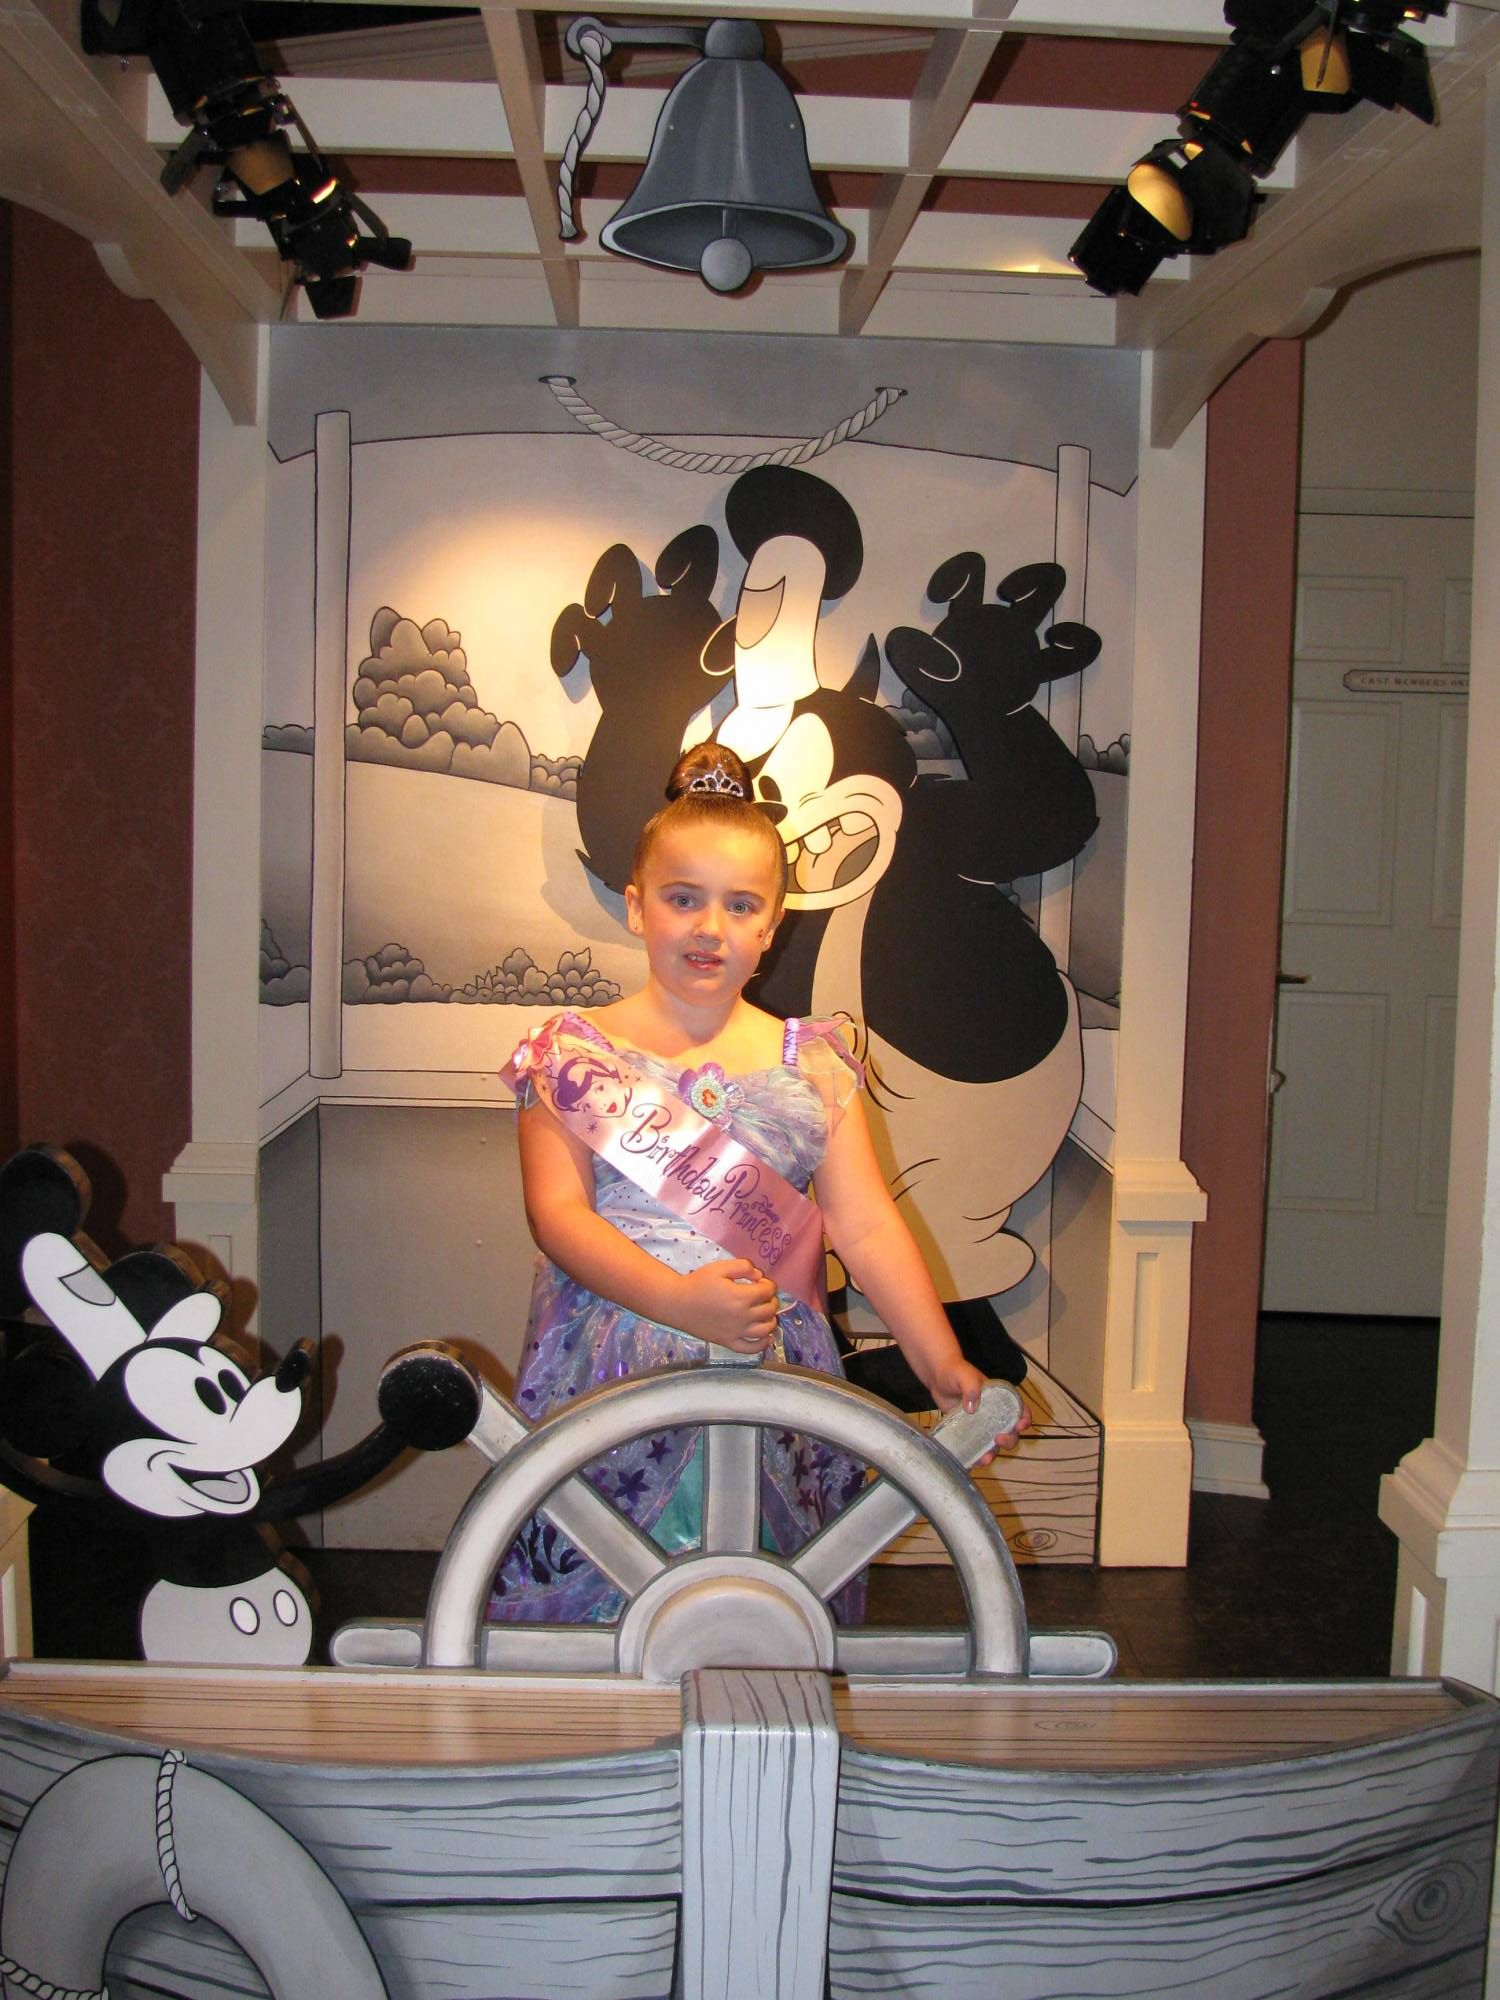 Magic Kingdom - I will give you a hand Steamboat Willy!!